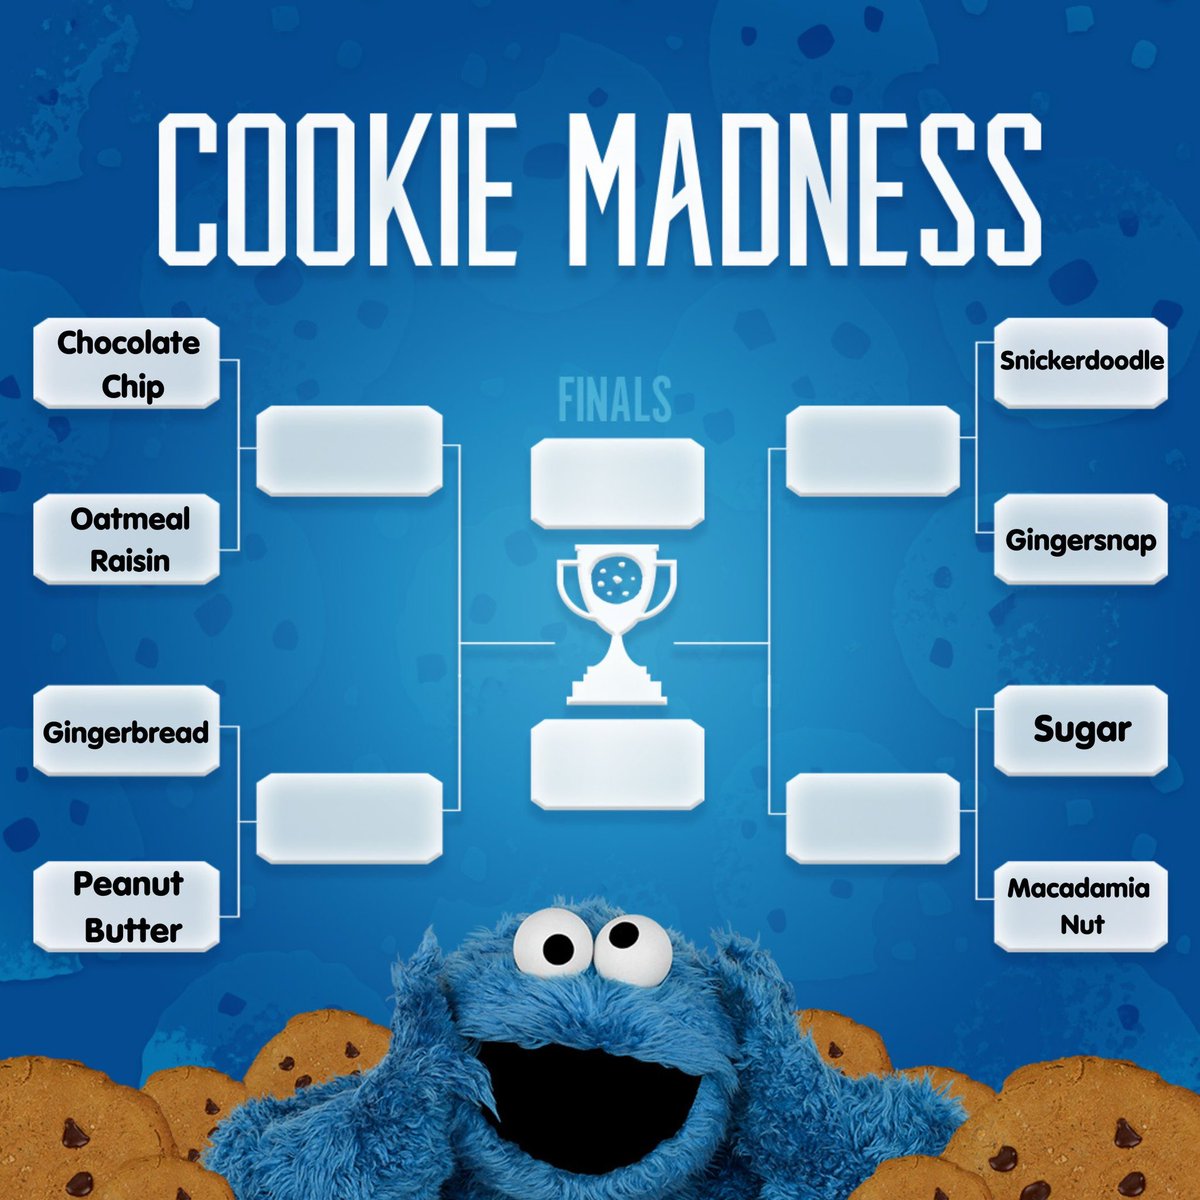 Me want you to vote for favorite cookies in me #CookieMadness Tournament. Make sure you favorite cookie make it to next round! 🍪🏆🍪